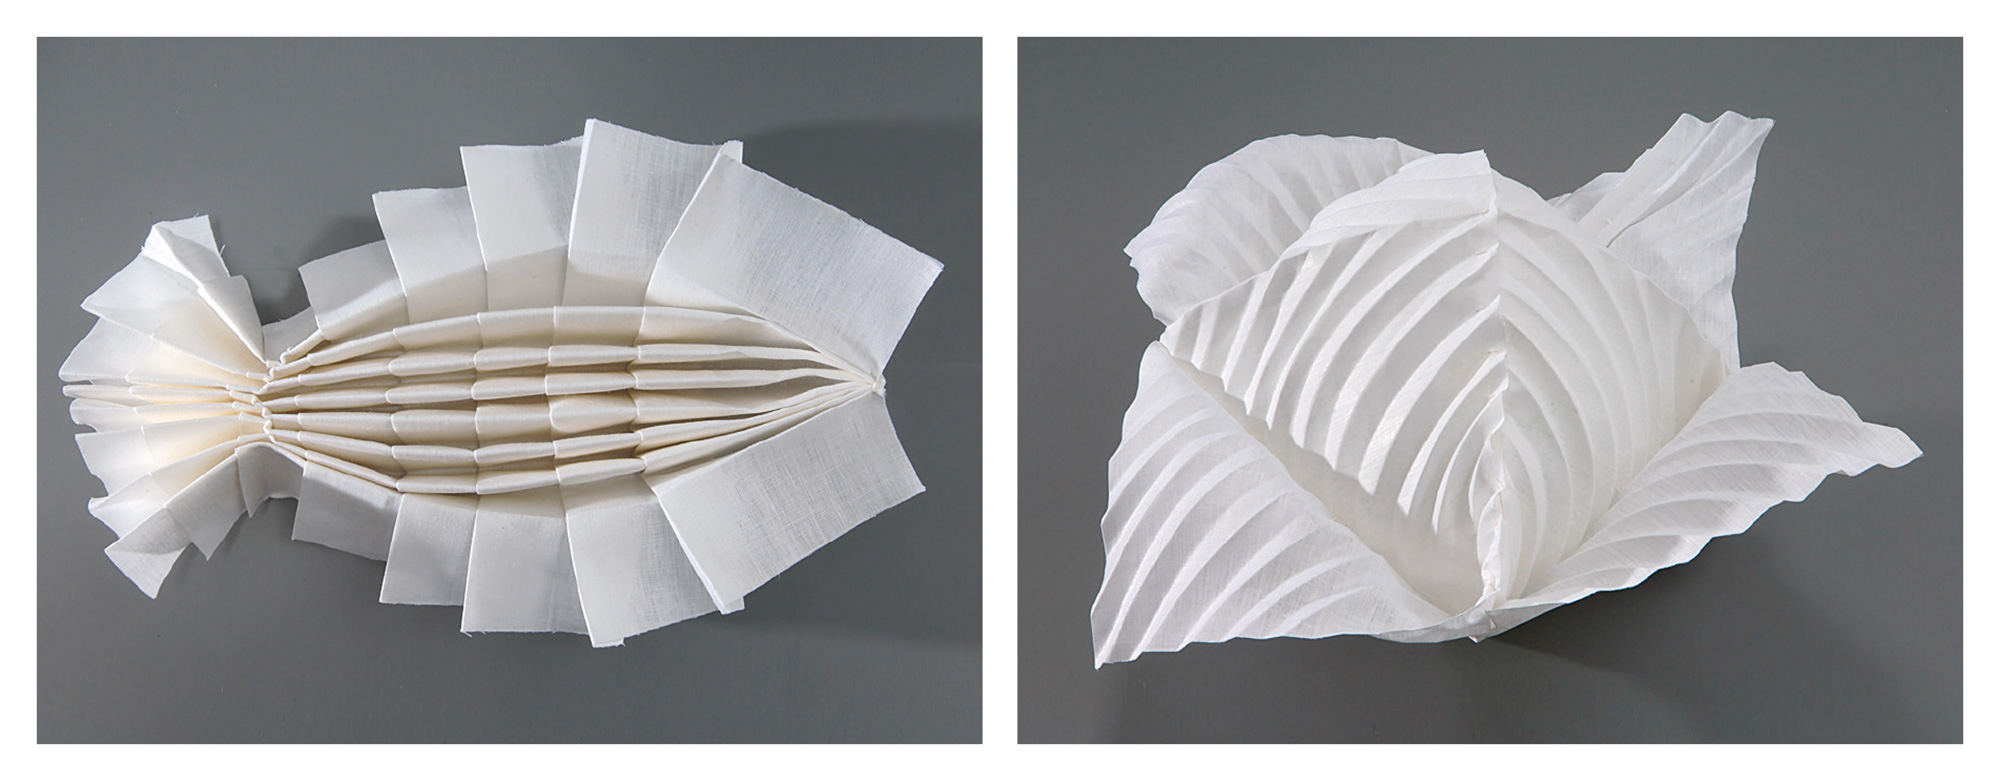 Two photographs of Joan Sallas’s napkin foldings. The first is titled “Fish” and resembles a fish. The second is titled “Cabbage” and resembles a cabbage.